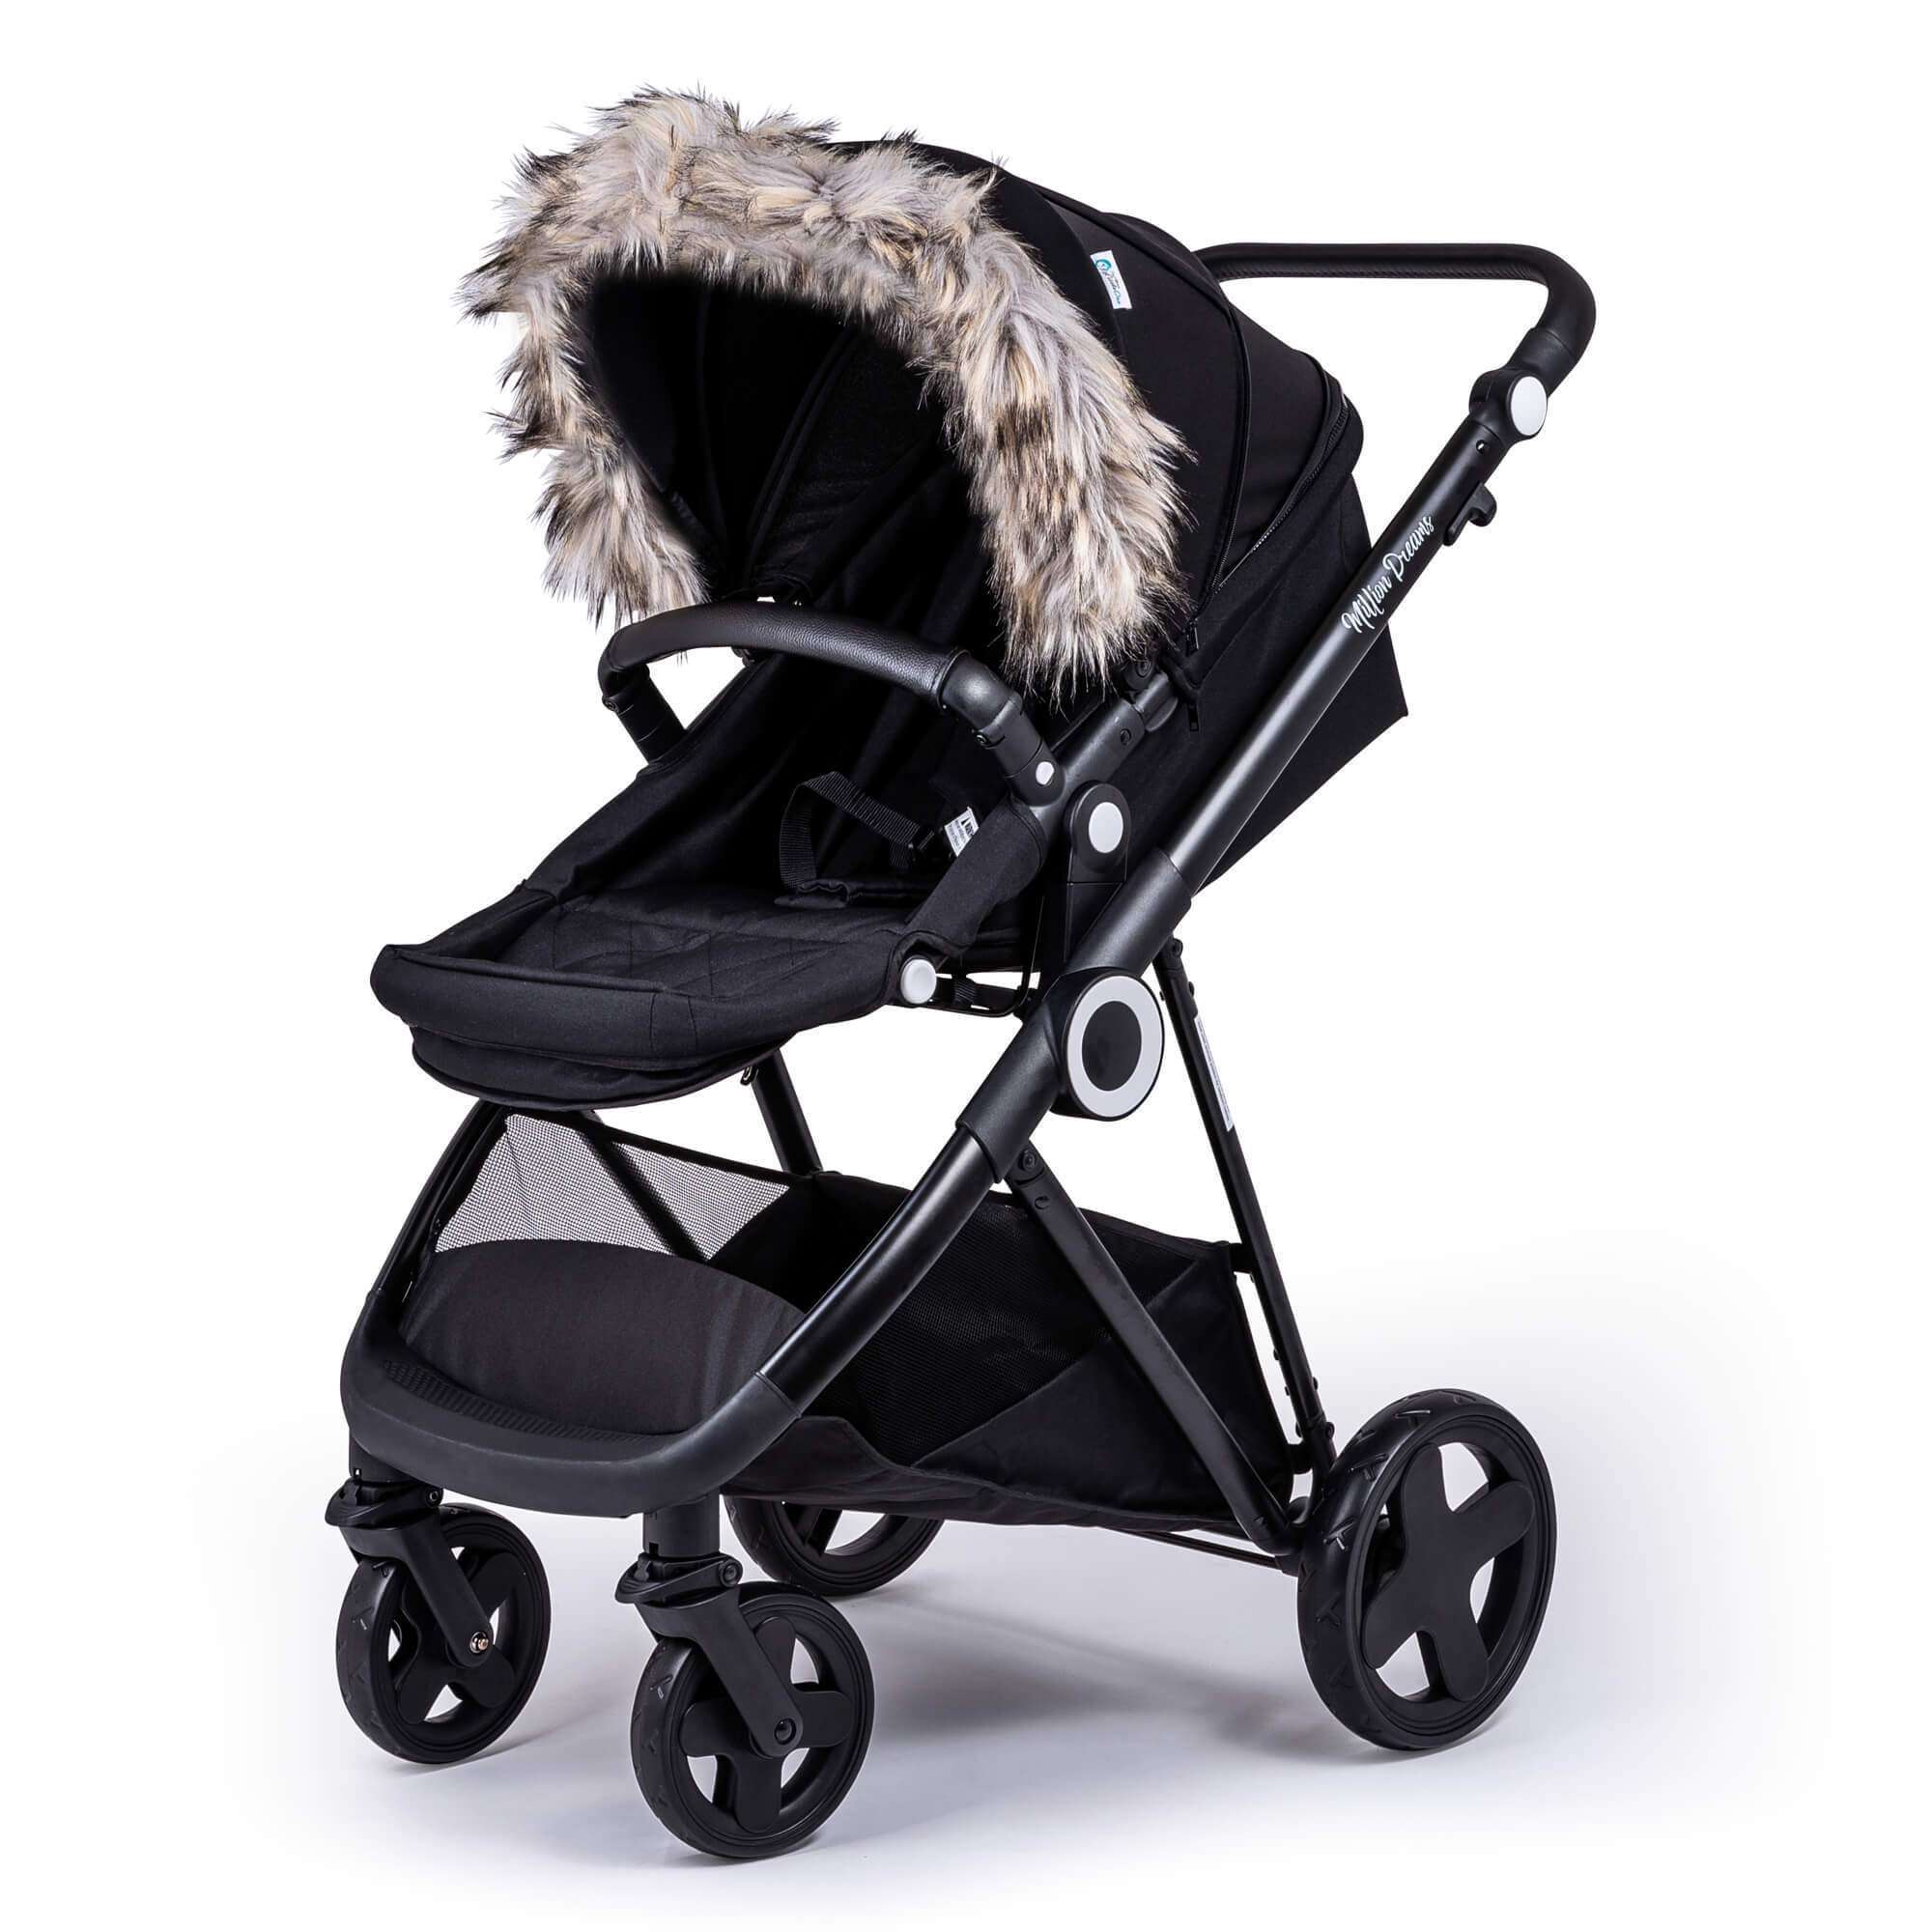 Pram Fur Hood Trim Attachment for Pushchair Compatible with Bumbleride - Light Grey / Fits All Models | For Your Little One